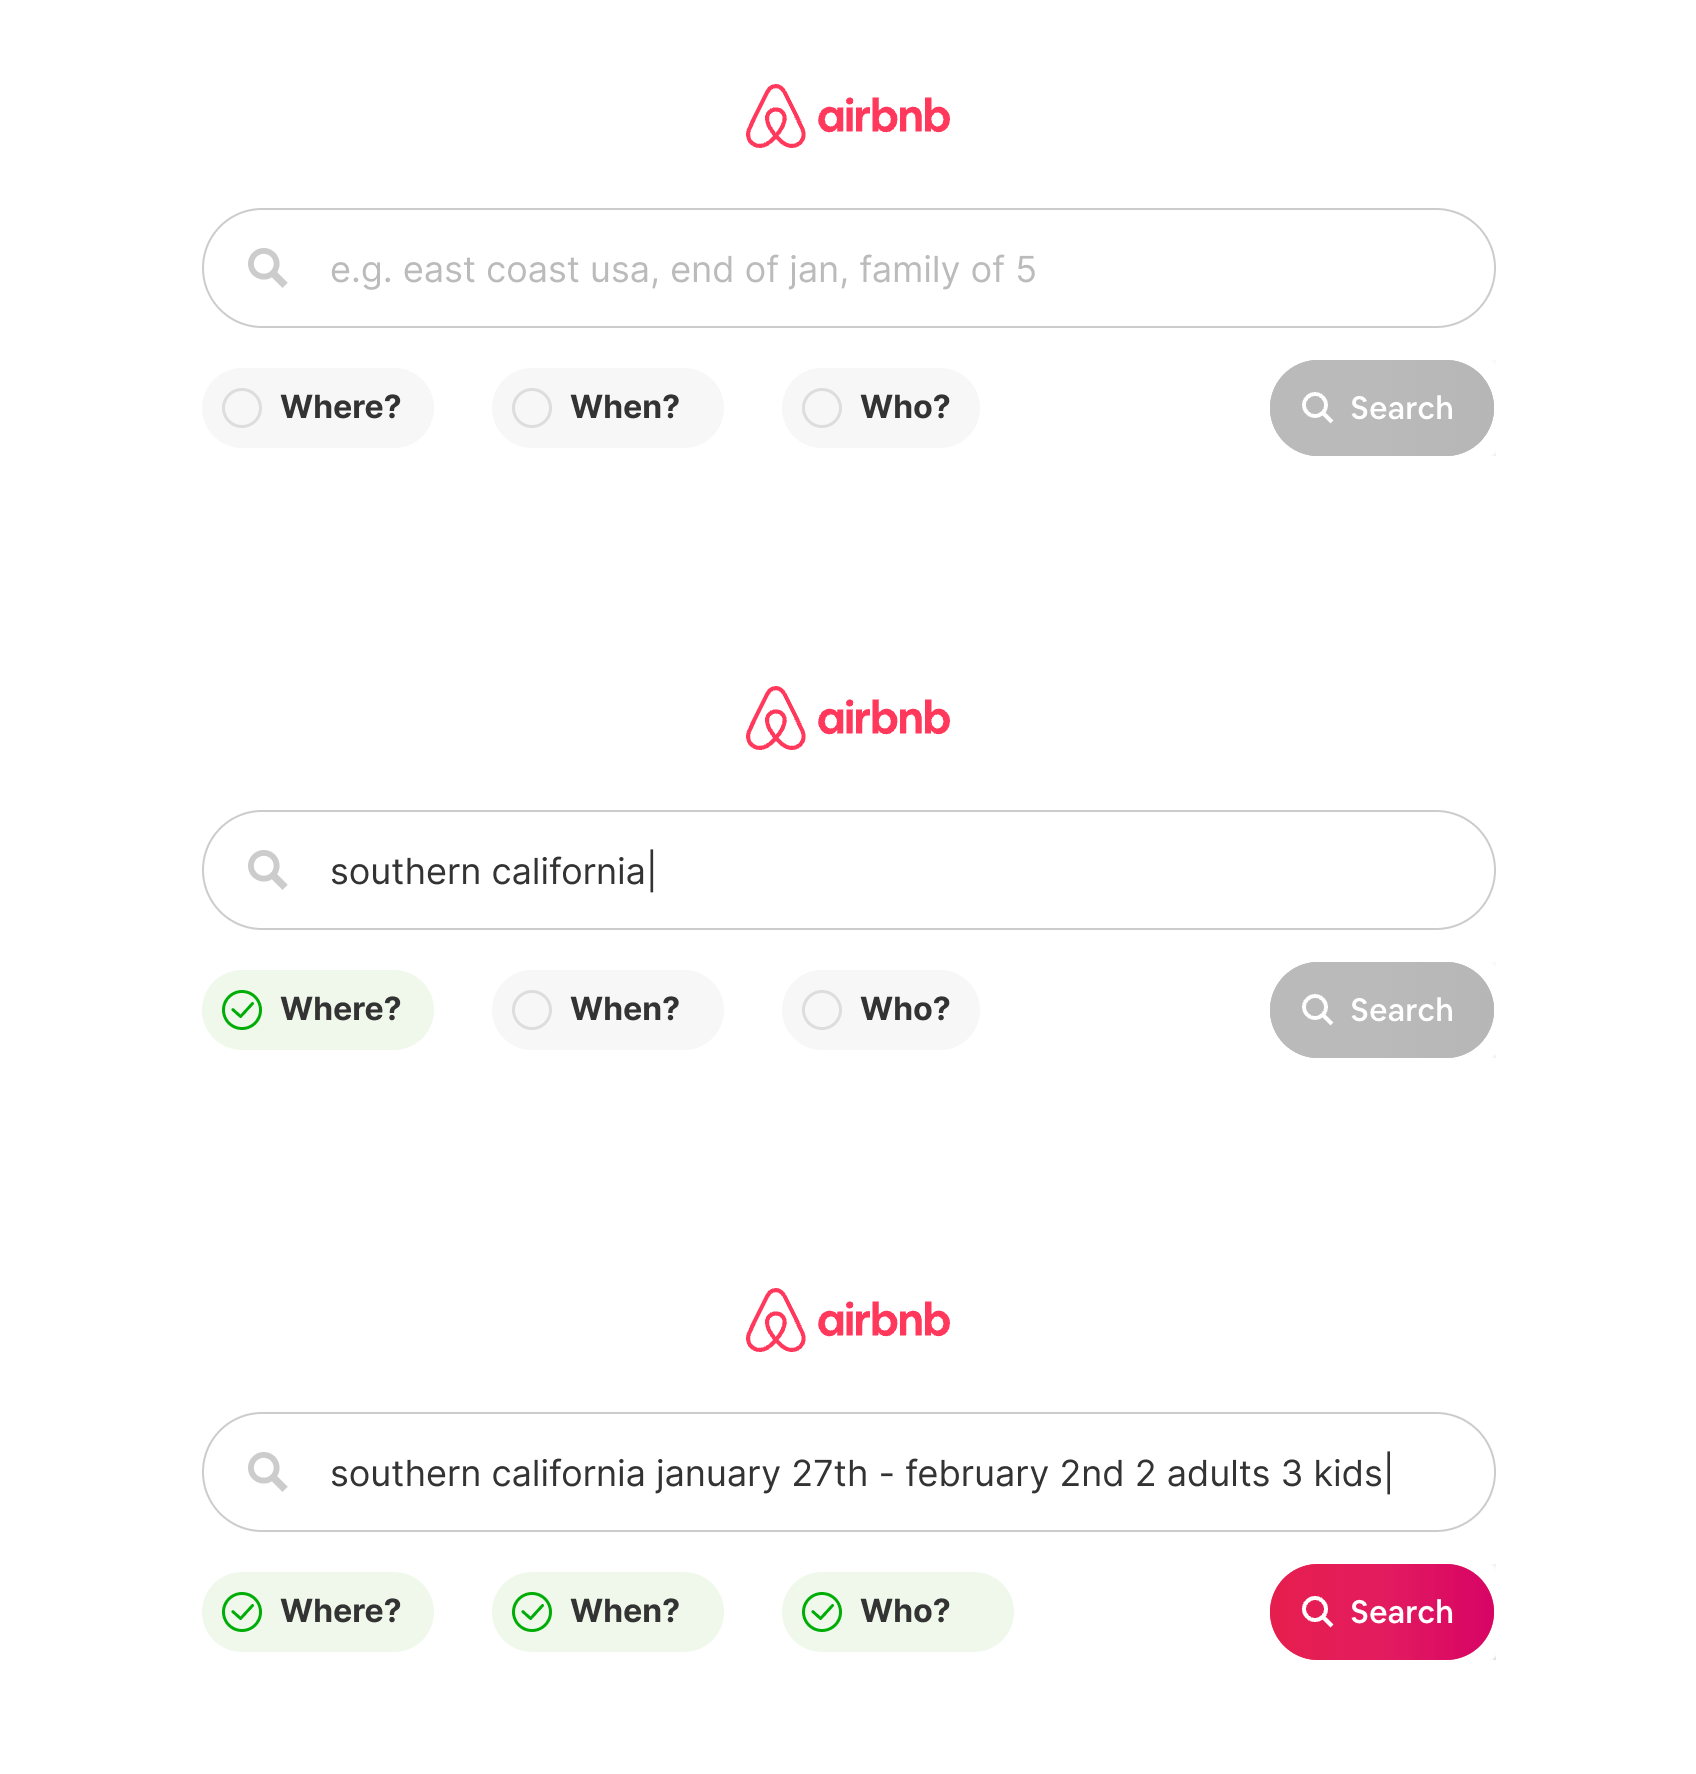 Three separate screenshots of an imagined Airbnb interface with a big text input that accepts natural language. The first screenshot shows an empty text input with three UI widgets that serve as signposts to show whether the questions “Where?”, “When?” and “Who?” have been answered. The second screenshot shows a text input with the words “southern california” entered and the “Where?” signpost checked off. The last screenshot shows all three signposts checked off and the search button enabled with the words “southern california january 27th - february 2nd 2adults 3 kids” in the text input.